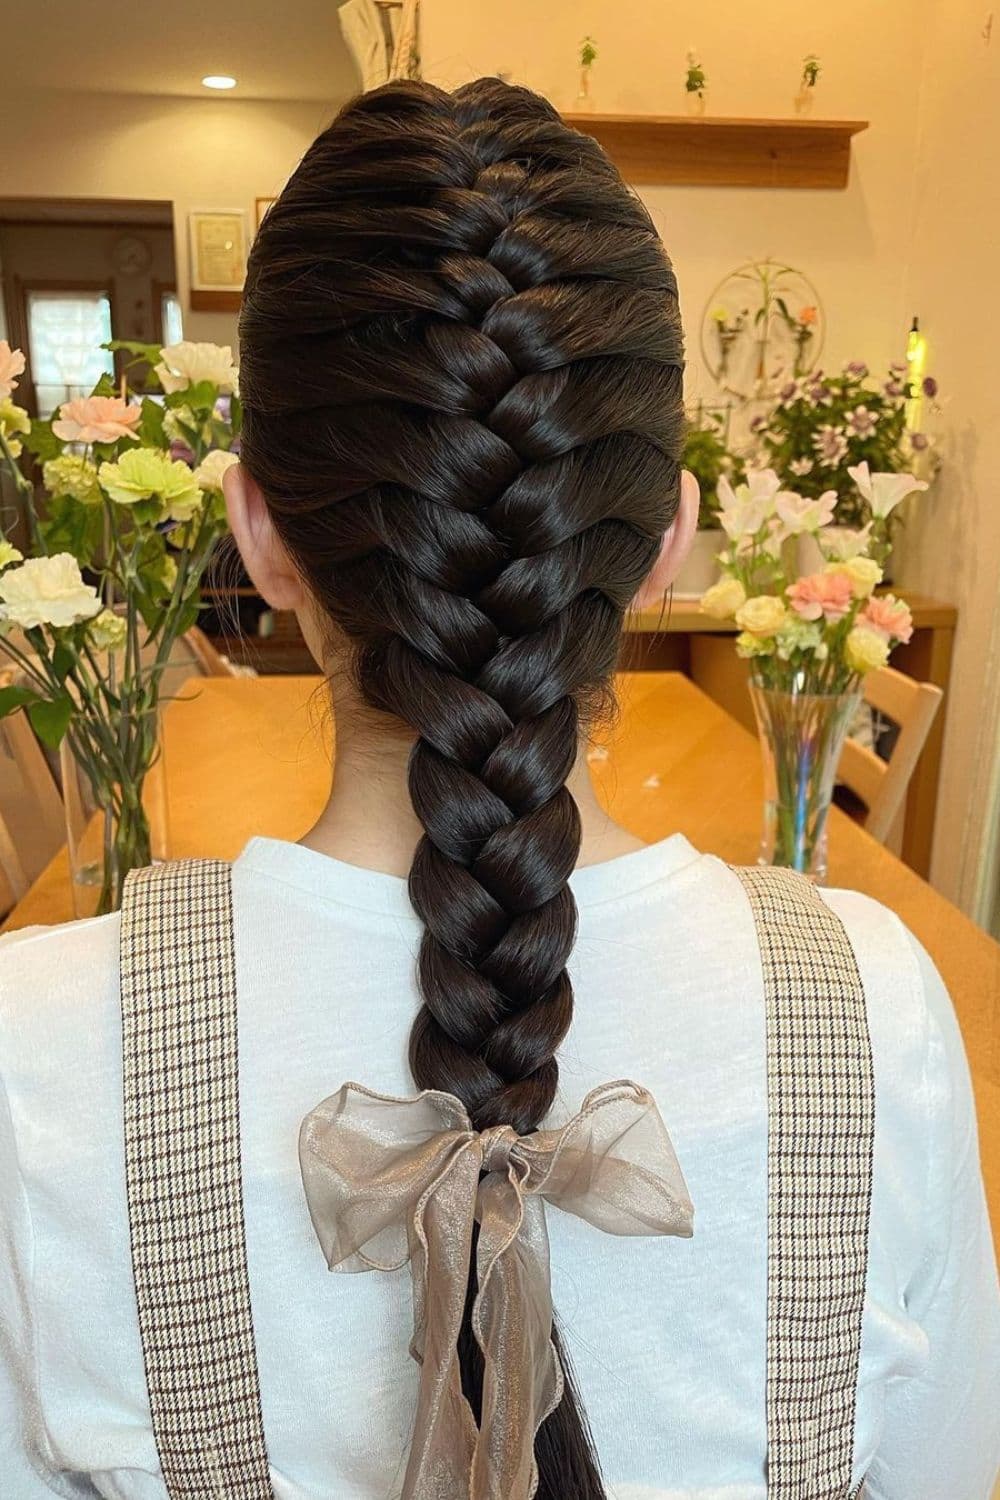 A woman with a classic French braid with ribbon at the end.